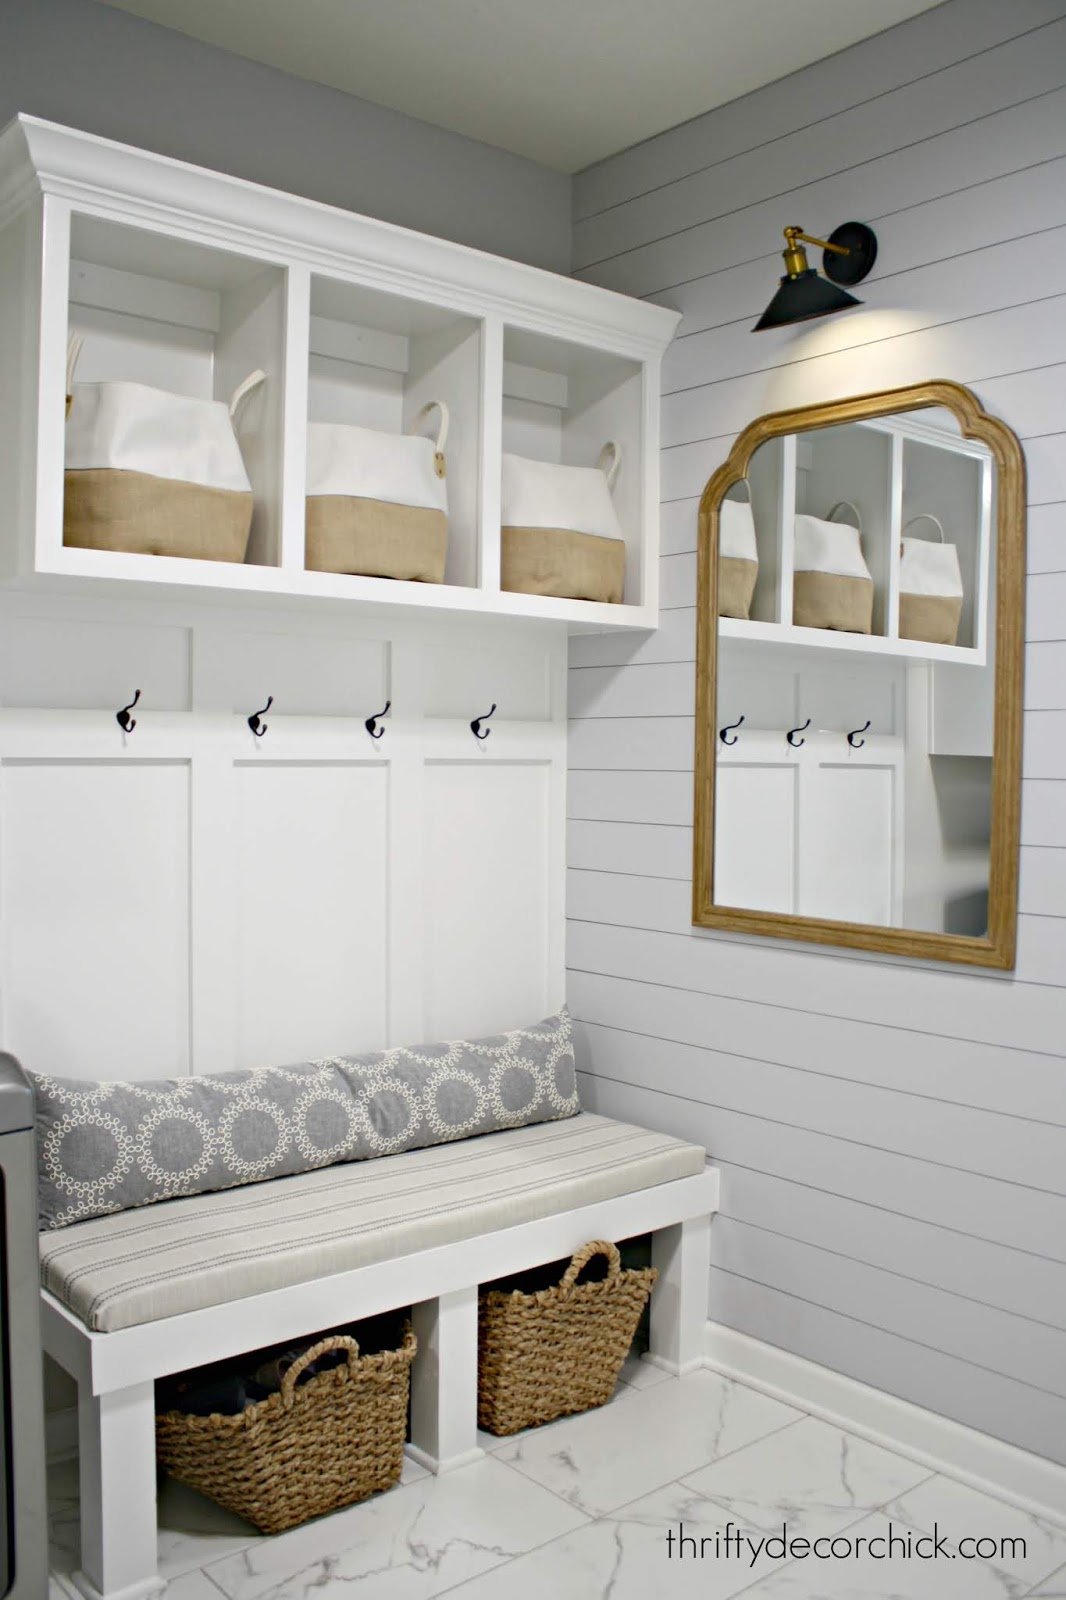 Mudroom Shoe Storage: Pictures, Options, Tips and Ideas